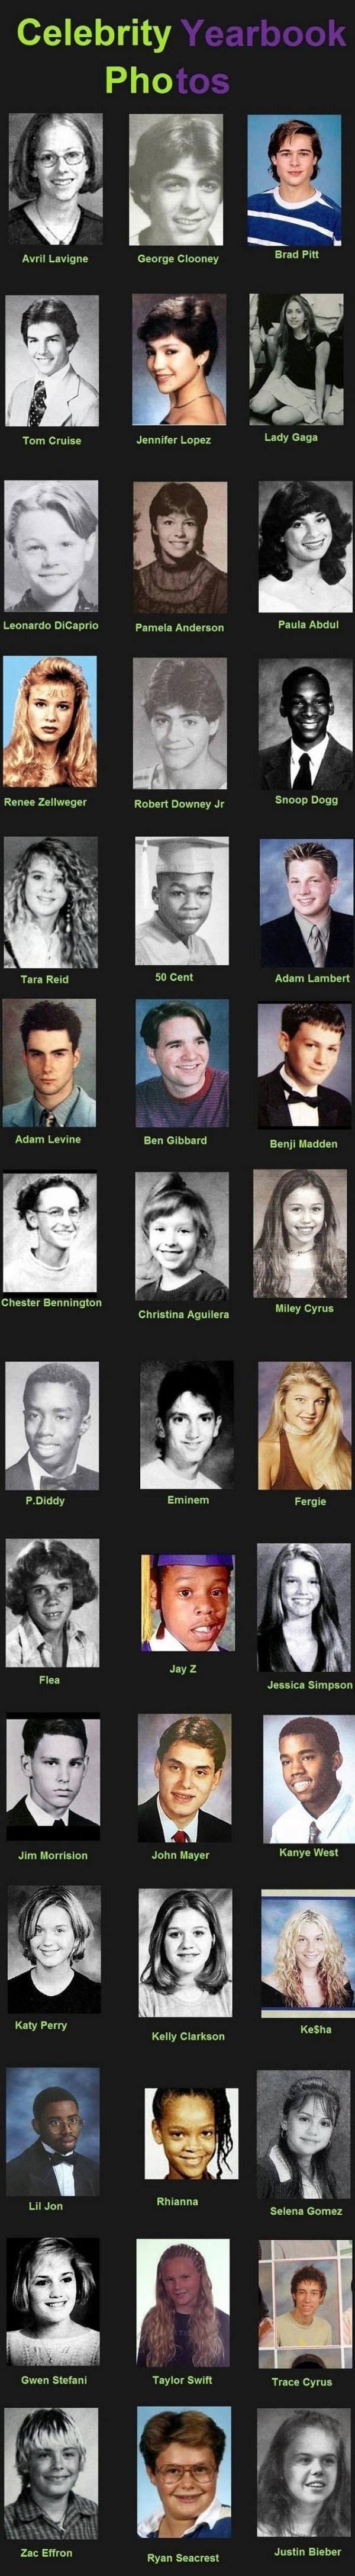 Some Celebrity Yearbook Photos funny picture